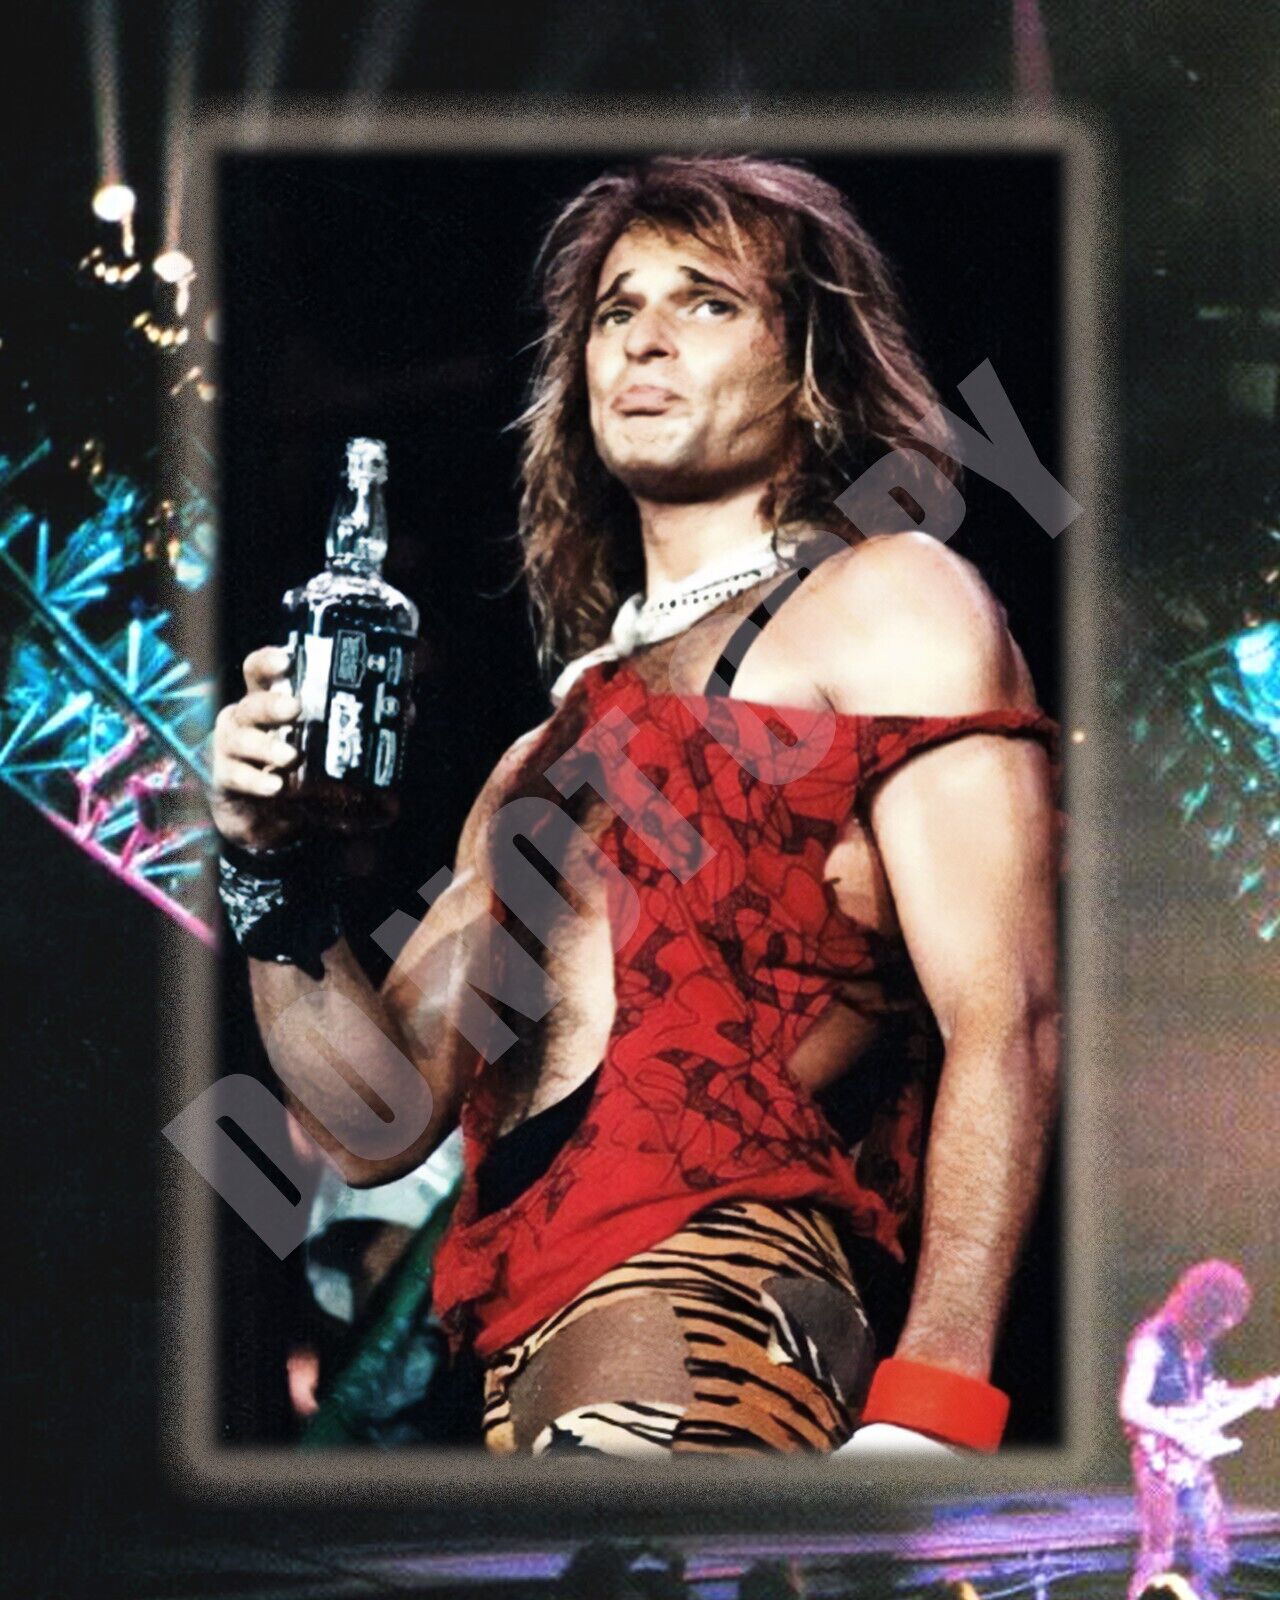 David Lee Roth Of Van Halen Sipping Some Jack Daniels During Concert 8x10 Photo